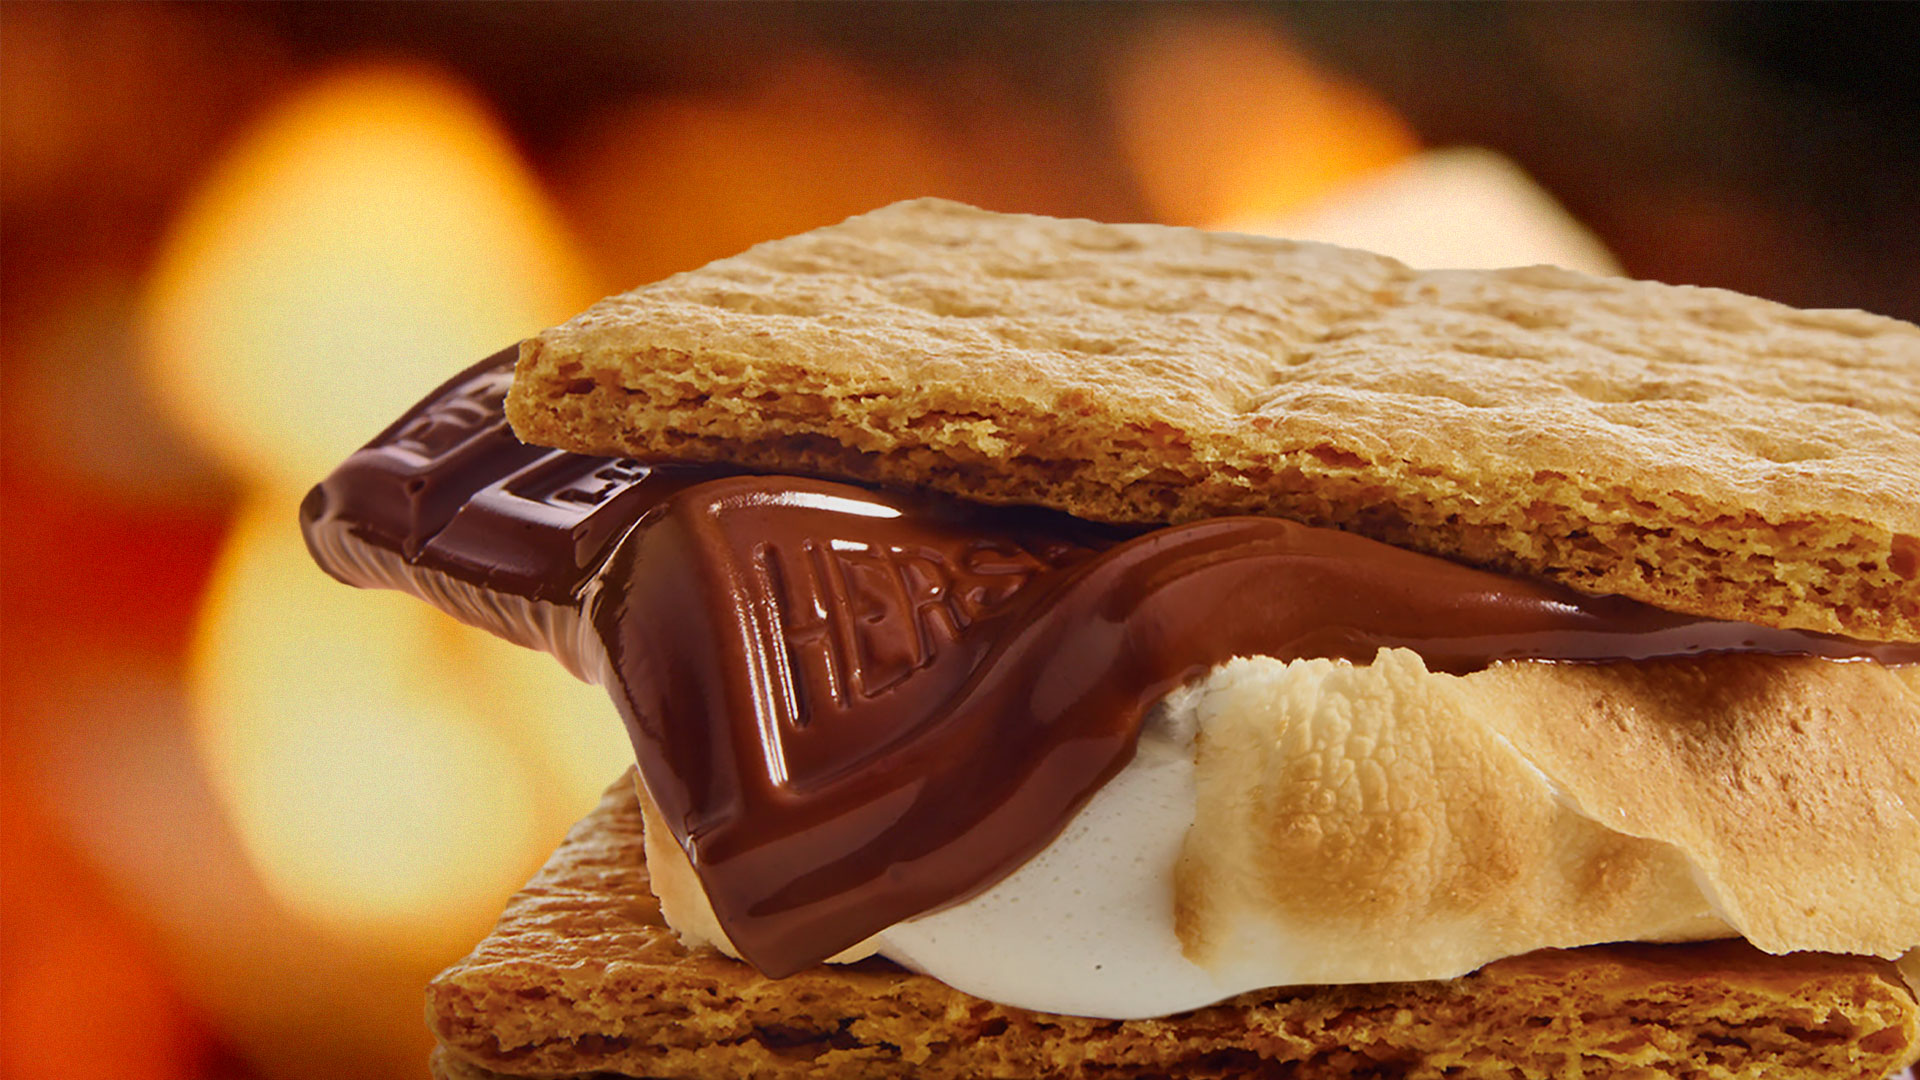 Mouth-watering photo of Hershey's chocolate melting under graham cracker and over a toasted marshmallow. A giant fire is behind the S'mores